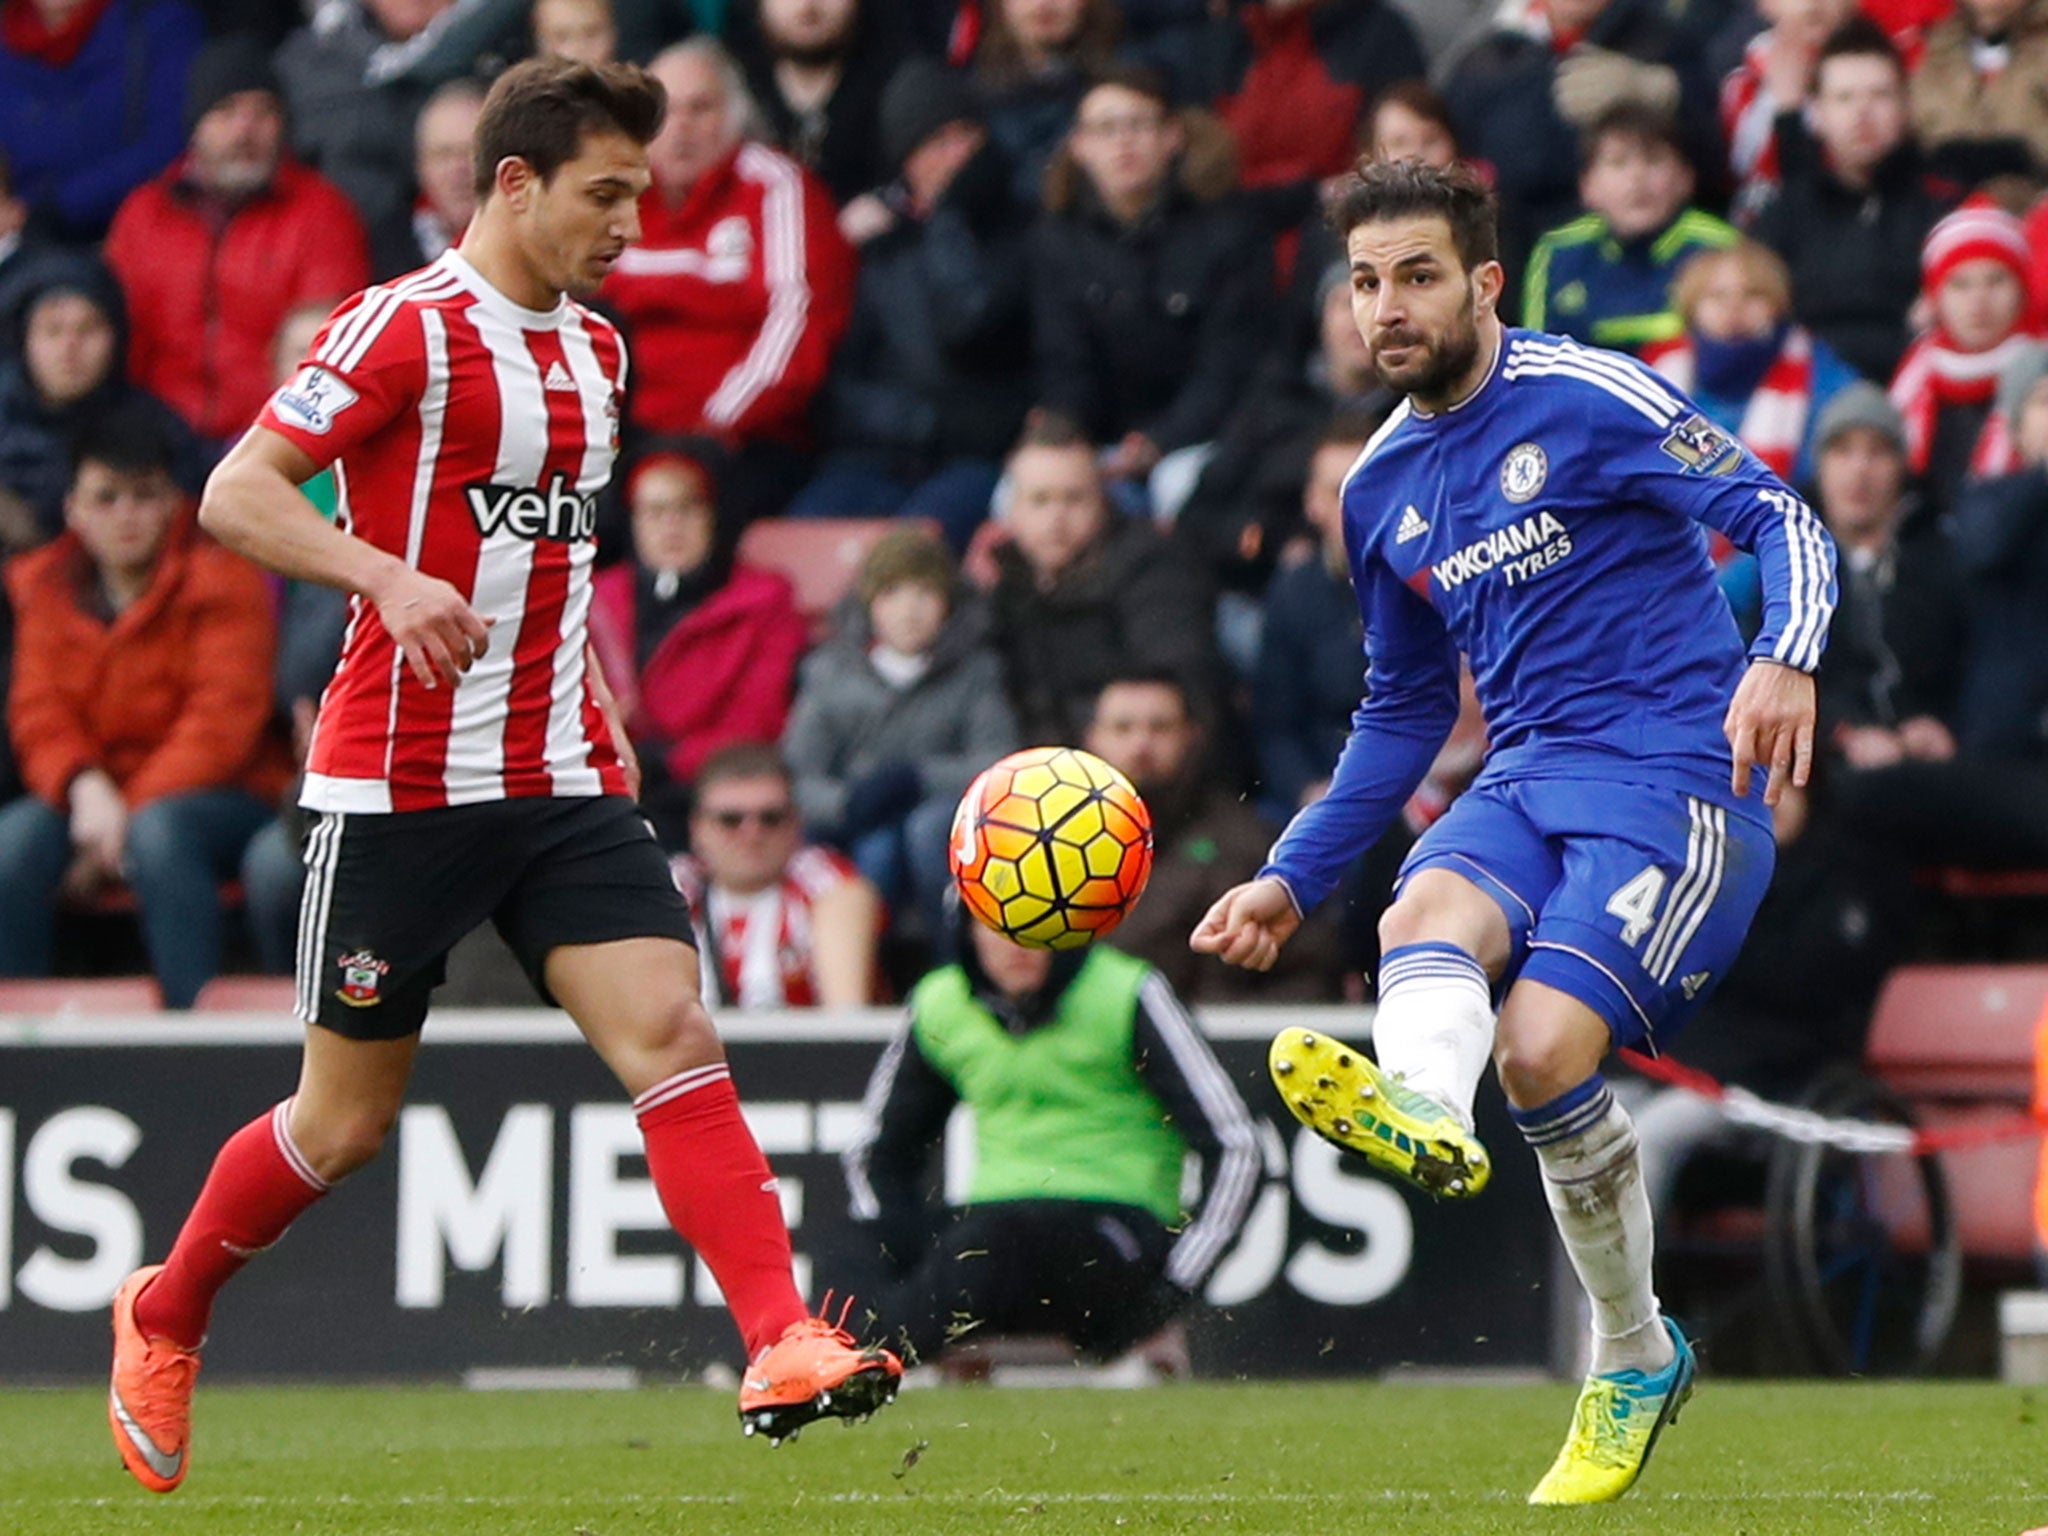 Cesc Fabregas scores for Chelsea with a misdirected cross against Southampton